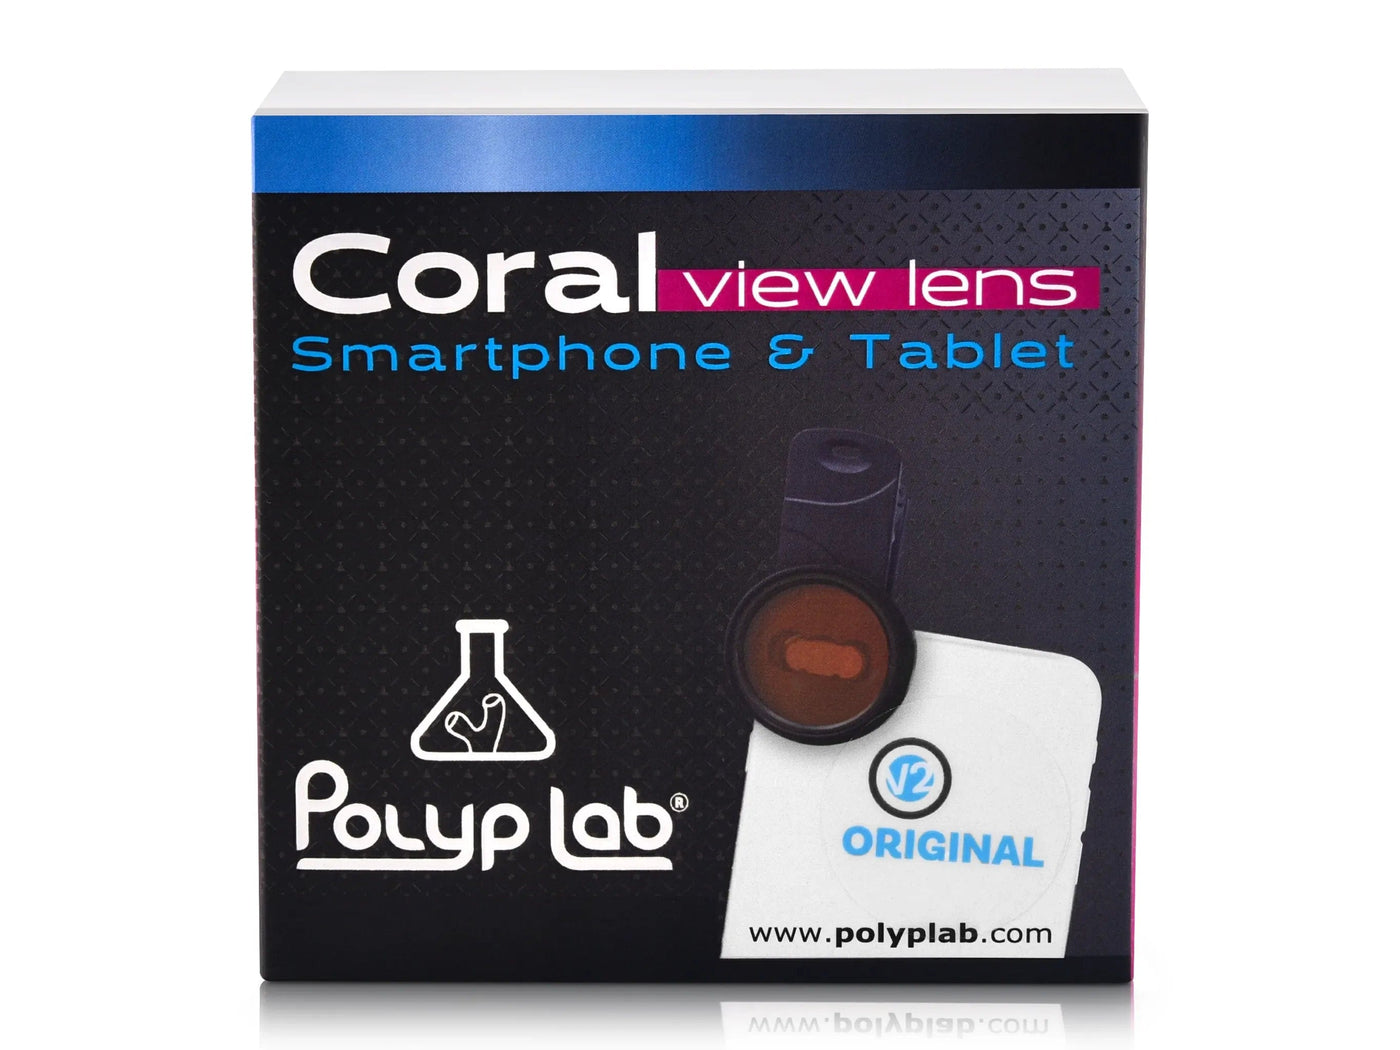 Polyplab Coral View lens v2 KIT for IPHONE